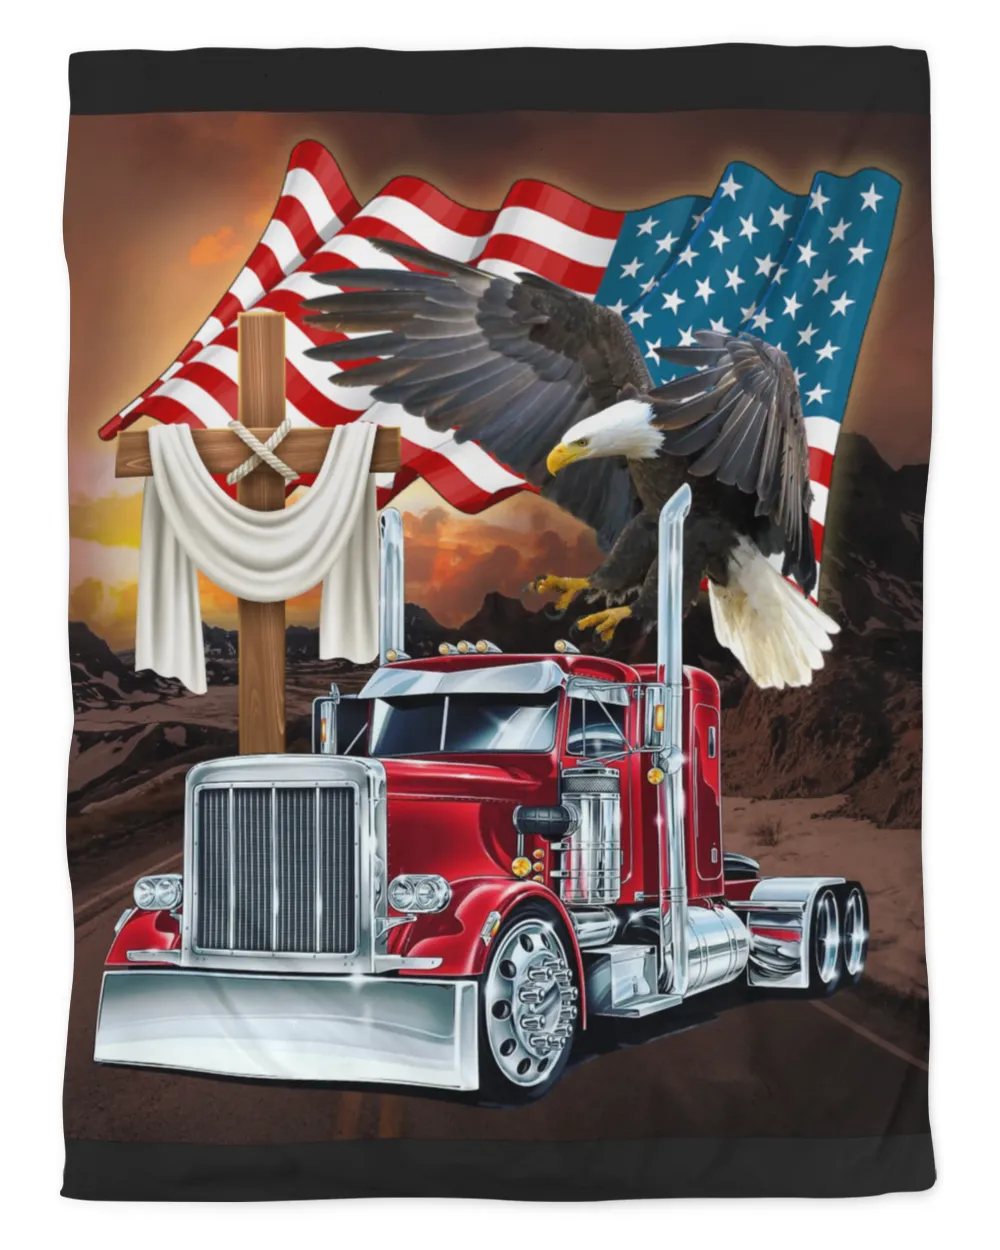 Special edition for trucker